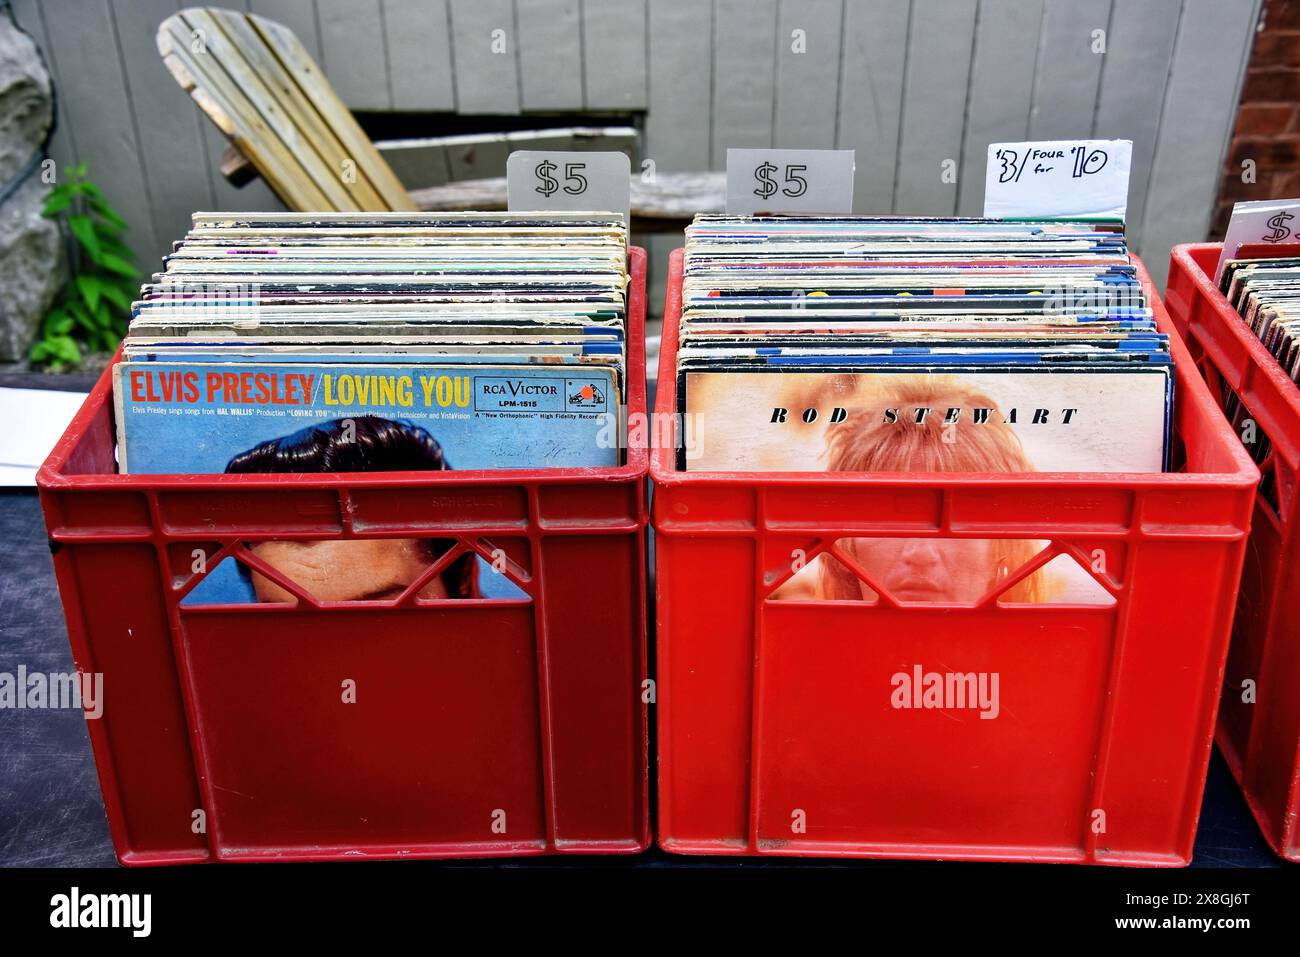 Ottawa, Canada - May 25, 2024: Milk container of albums, including Elvis Presley and Rod Stewart, on sale at the annual Glebe neighborhood garage sale, which takes place for several blocks in the Glebe area of Ottawa, Ontario. Milk cartons were popular methods of storing albums. Stock Photo